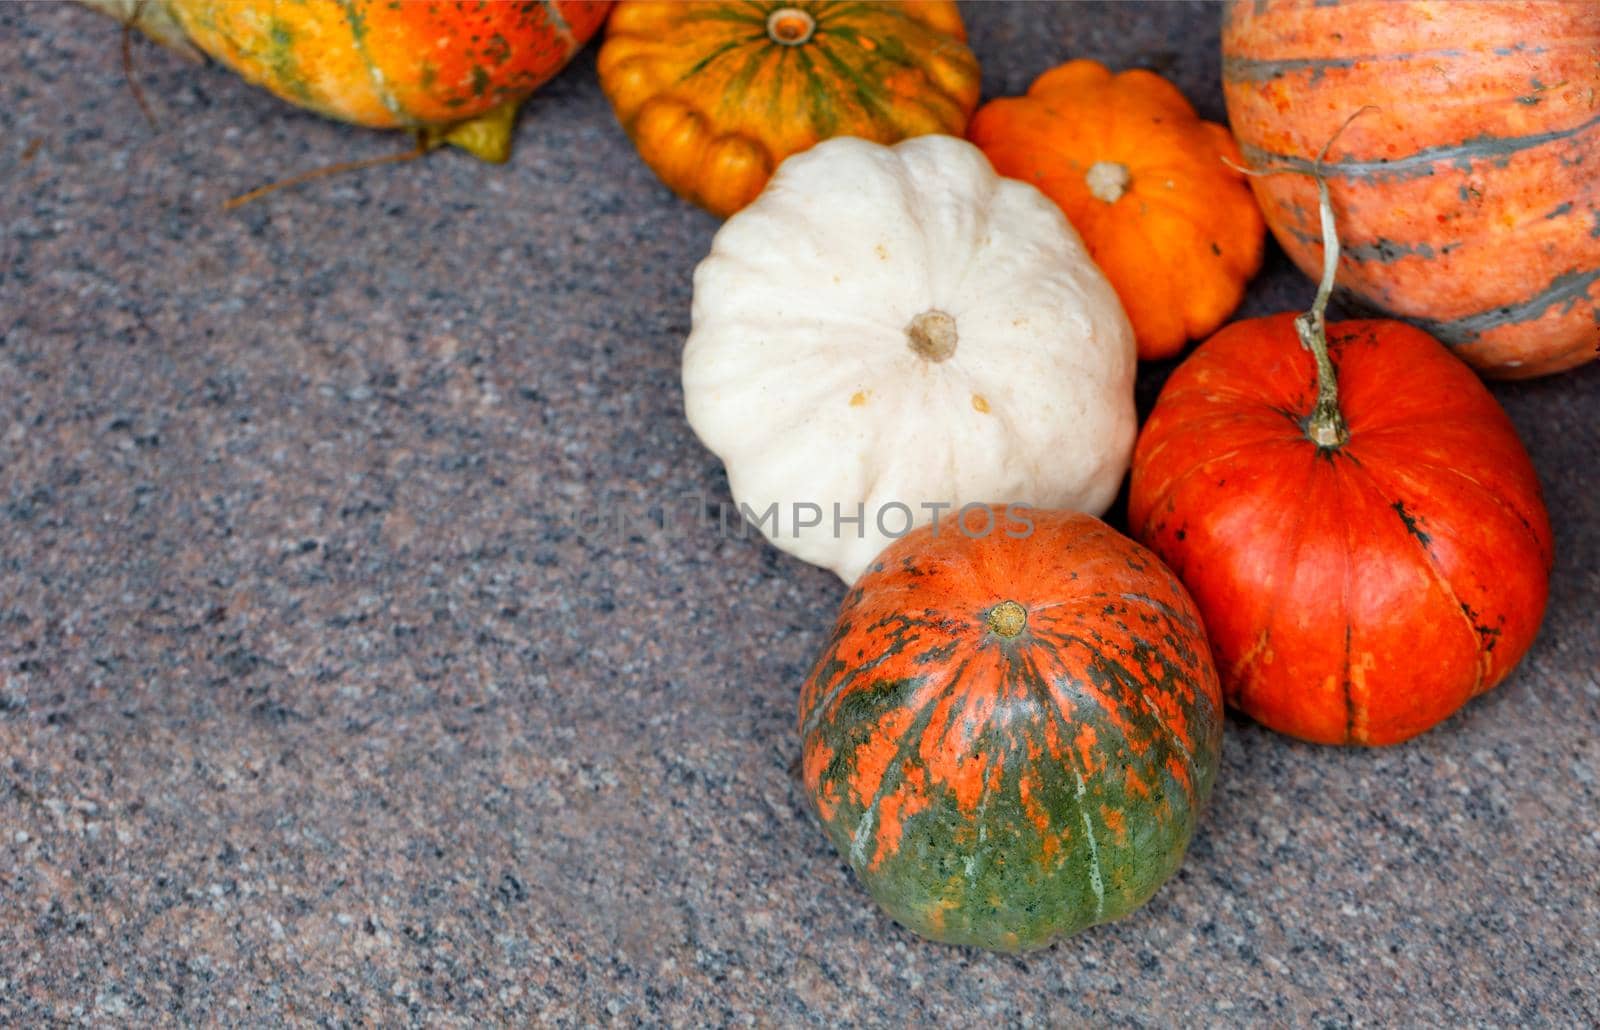 Orange and yellow ripe pumpkins lie on the background of a granite surface, selective focus. by Sergii